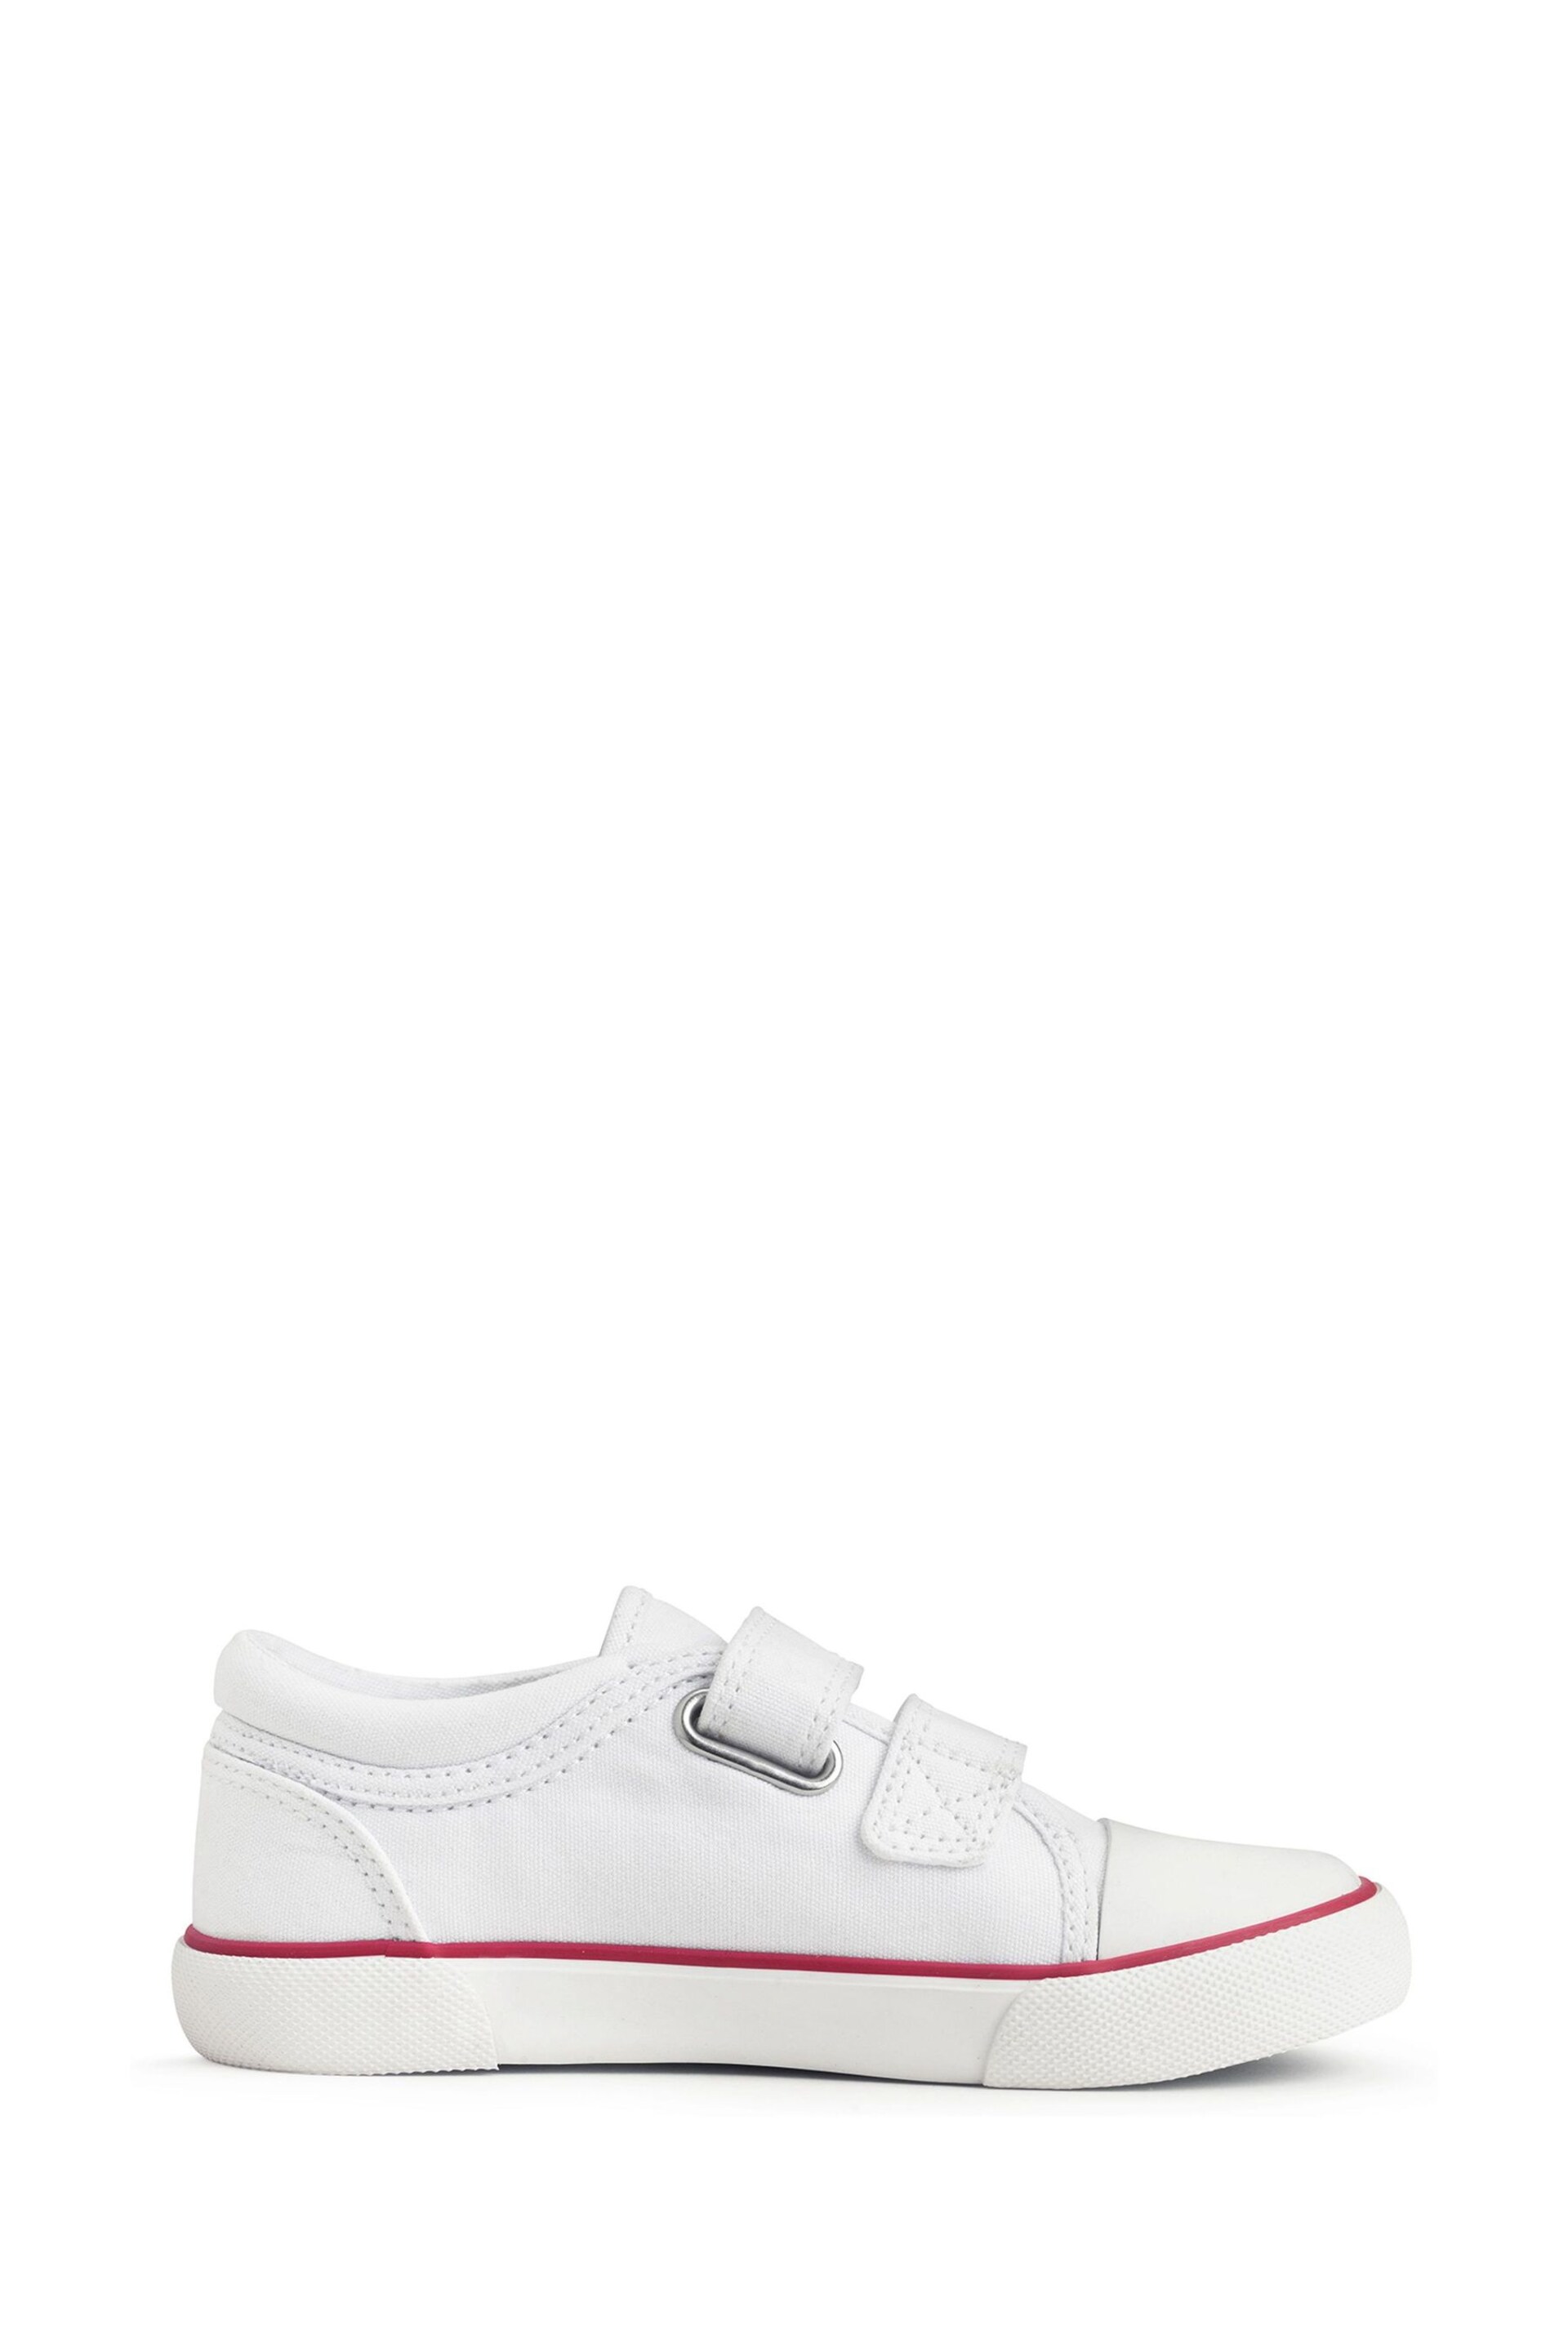 Start-Rite Sandcastle White Canvas Washable White Trainers - Image 1 of 6